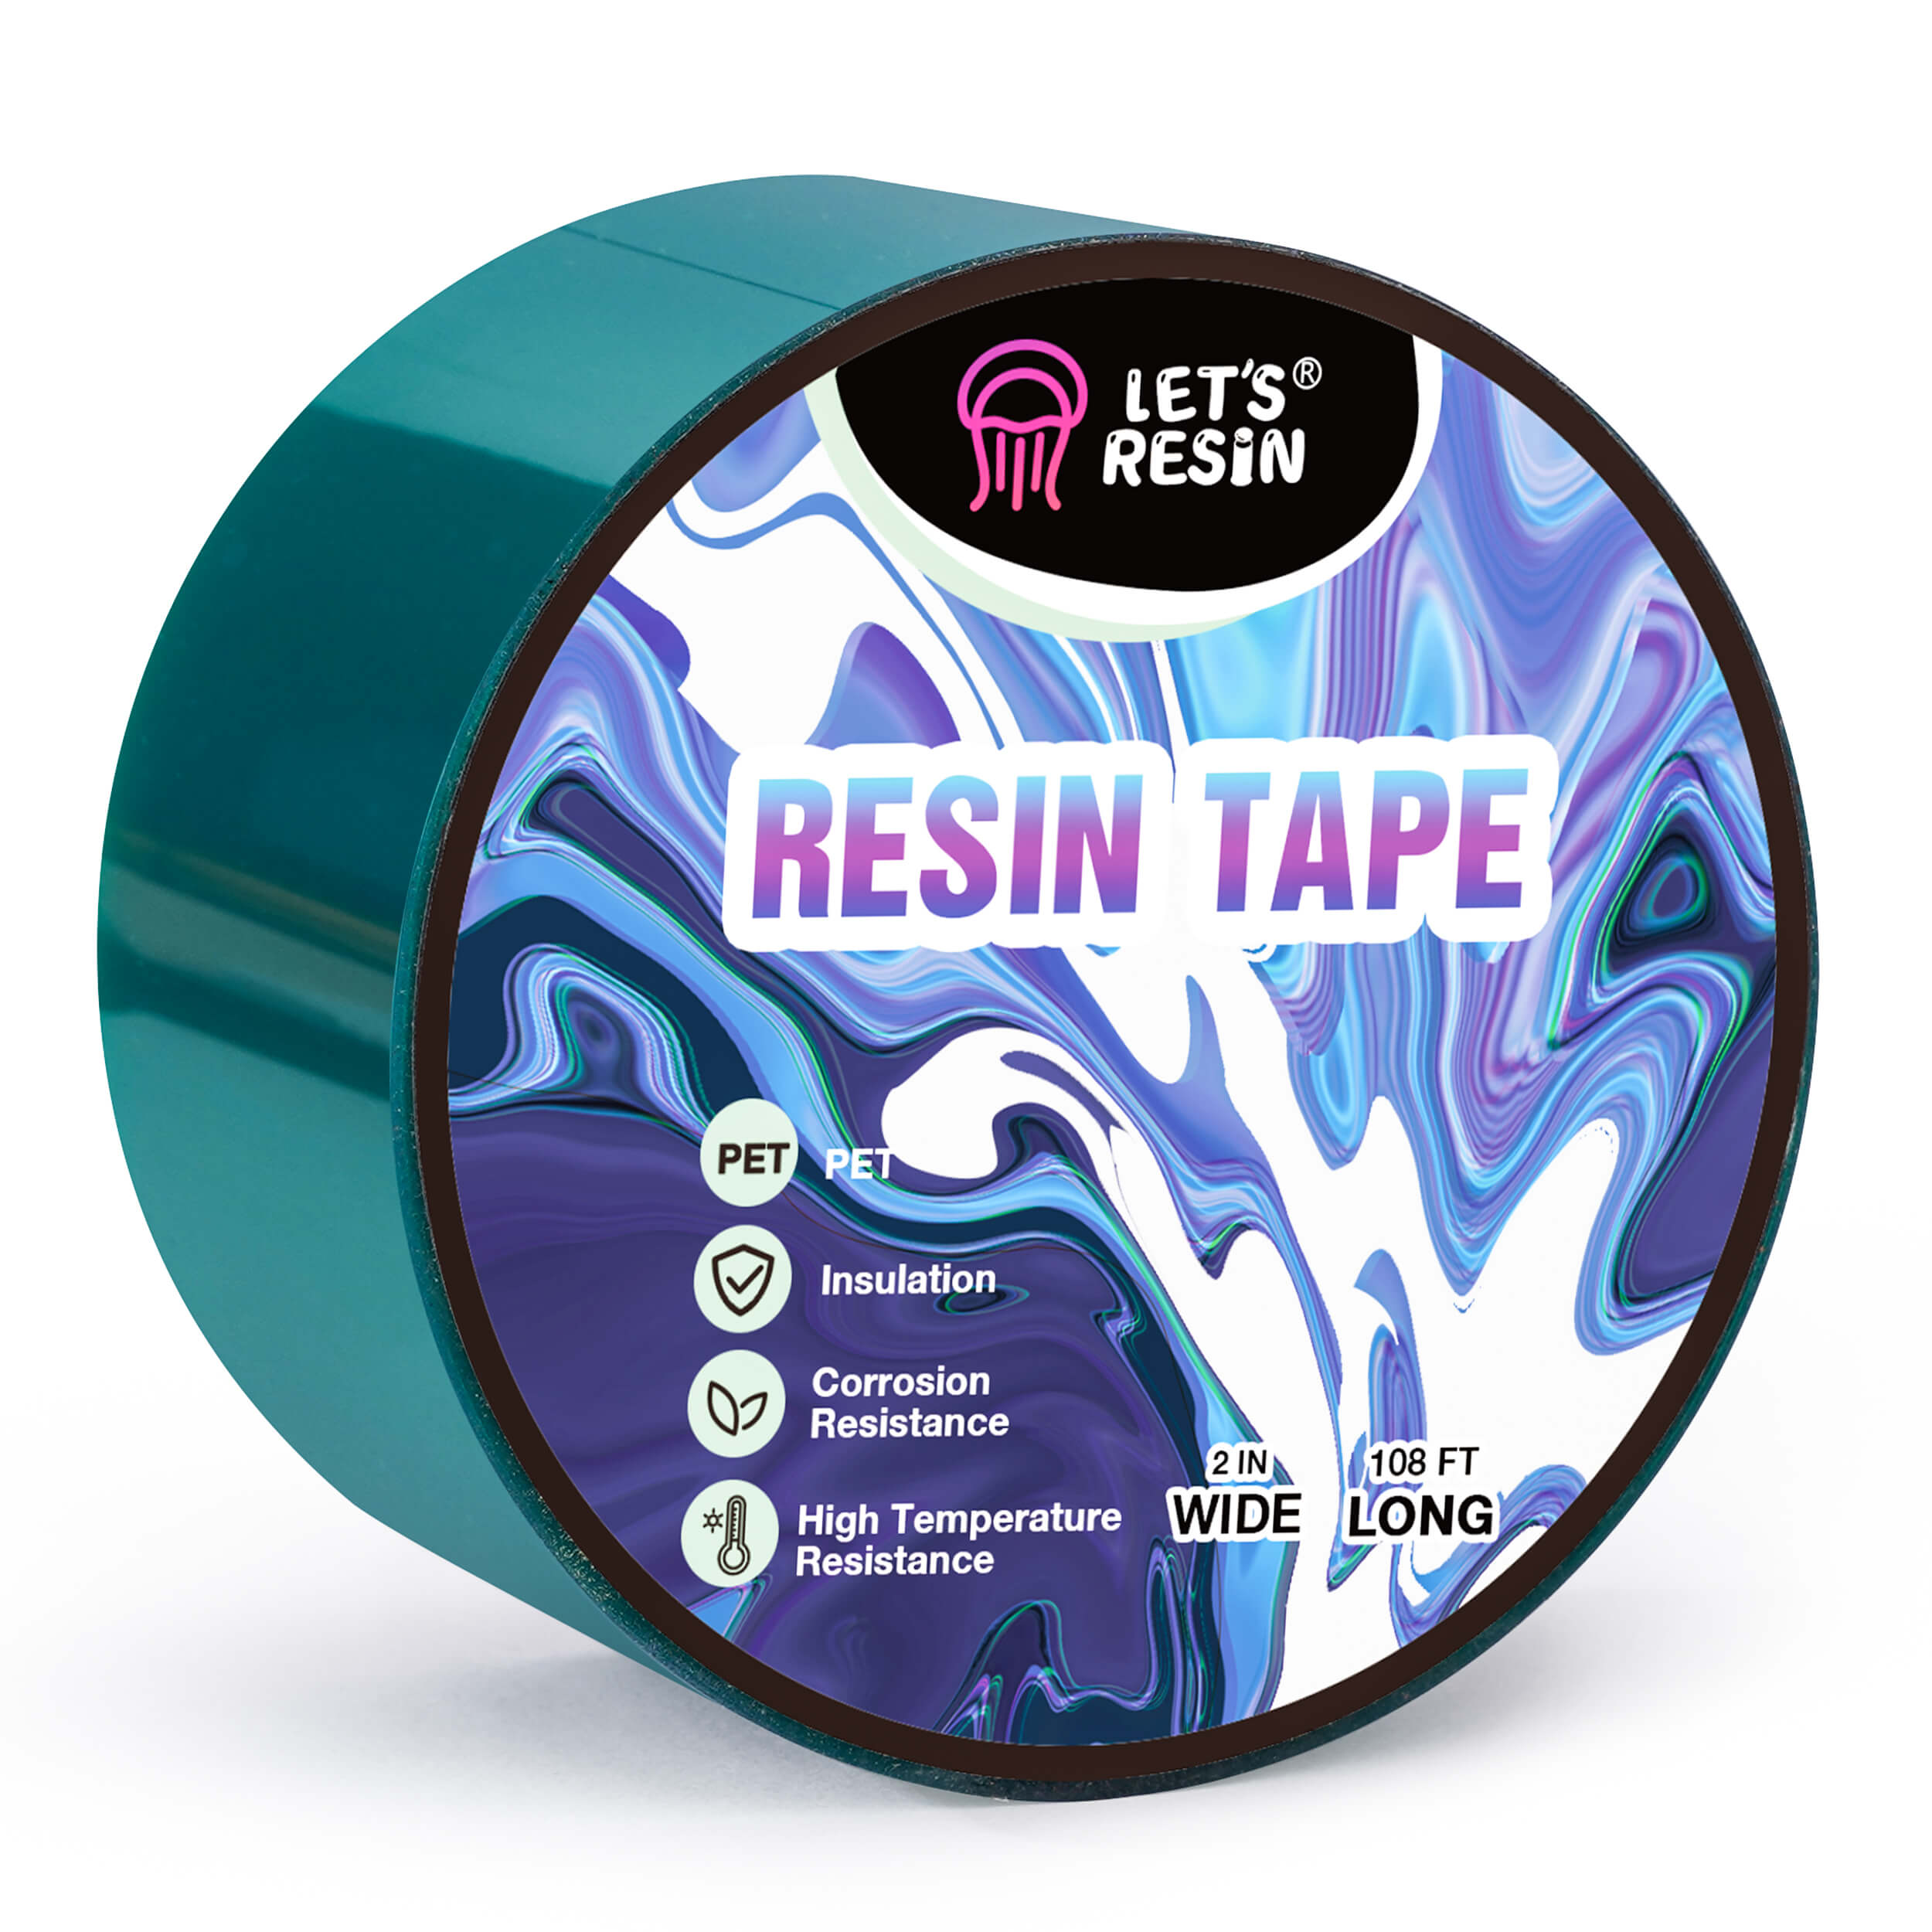 Resin Tape for Epoxy Resin Molding and Epoxy Mold Release for Epoxy Resin Thermal Adhesive Tape for Micro Pour Epoxy Resin Tape and Form with UV